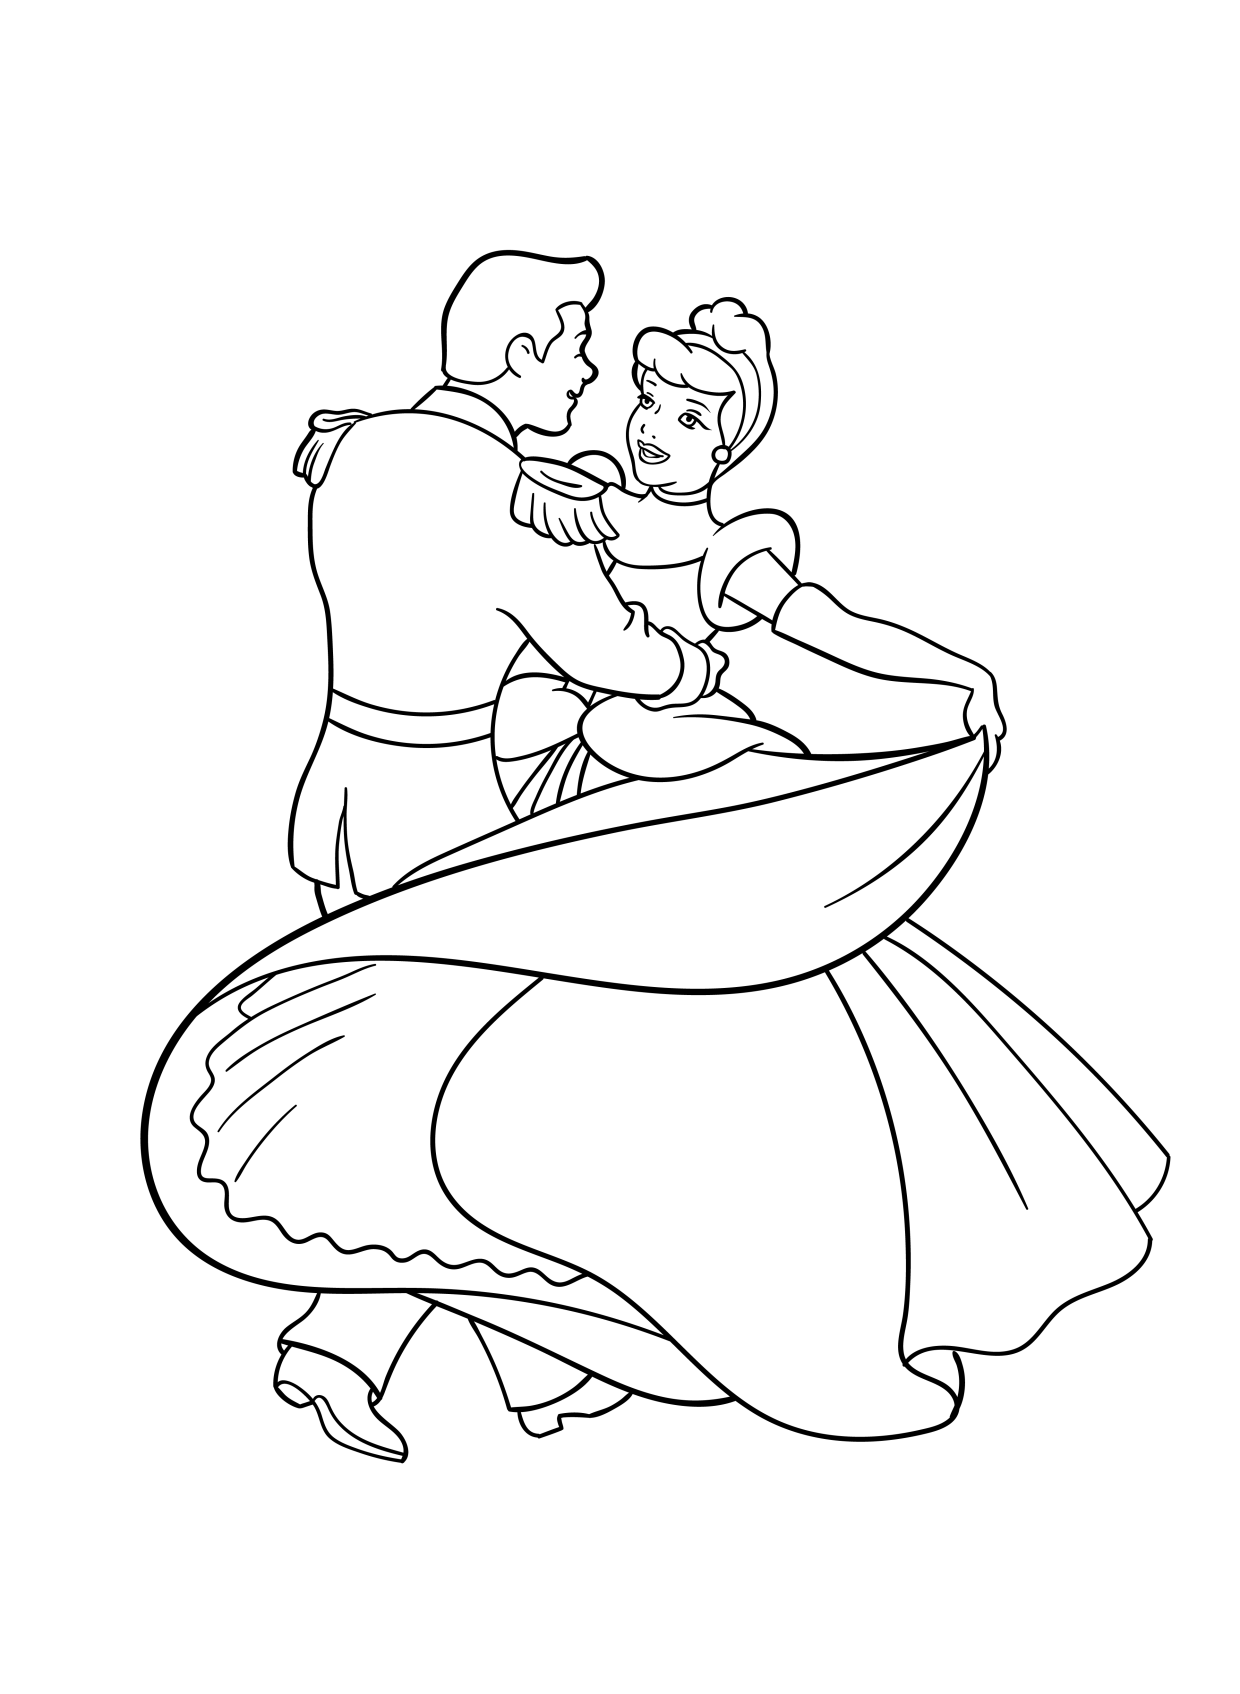 Cinderella with Prince Charming Coloring Pages: Printable to Print!